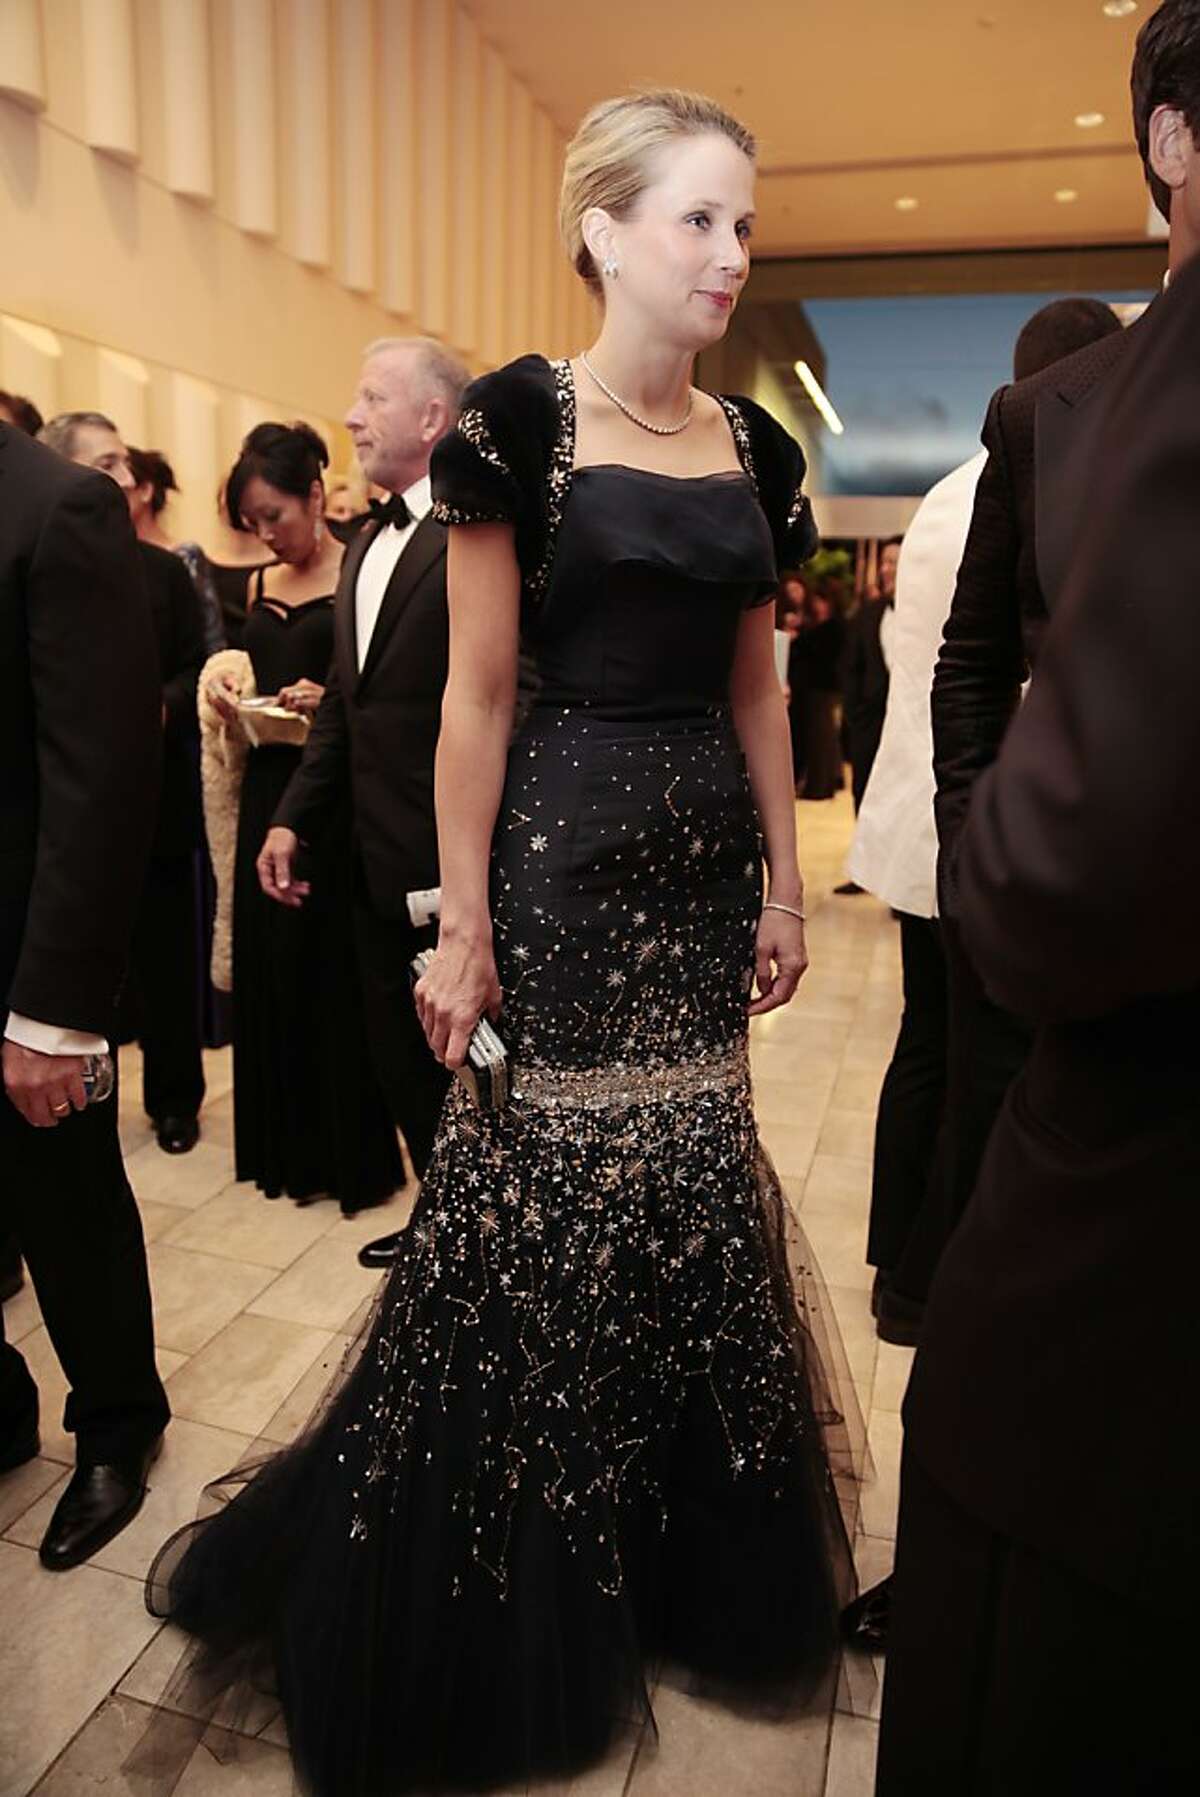 Attire 2.Take care with your appearance. This is not the night to change at the office, as if going to a cocktail party in business casual. Pictured: Yahoo CEO Marissa Mayer attends the 102nd San Francisco Symphony Gala in San Francisco Calif. on Tuesday, Sept. 3, 2013.